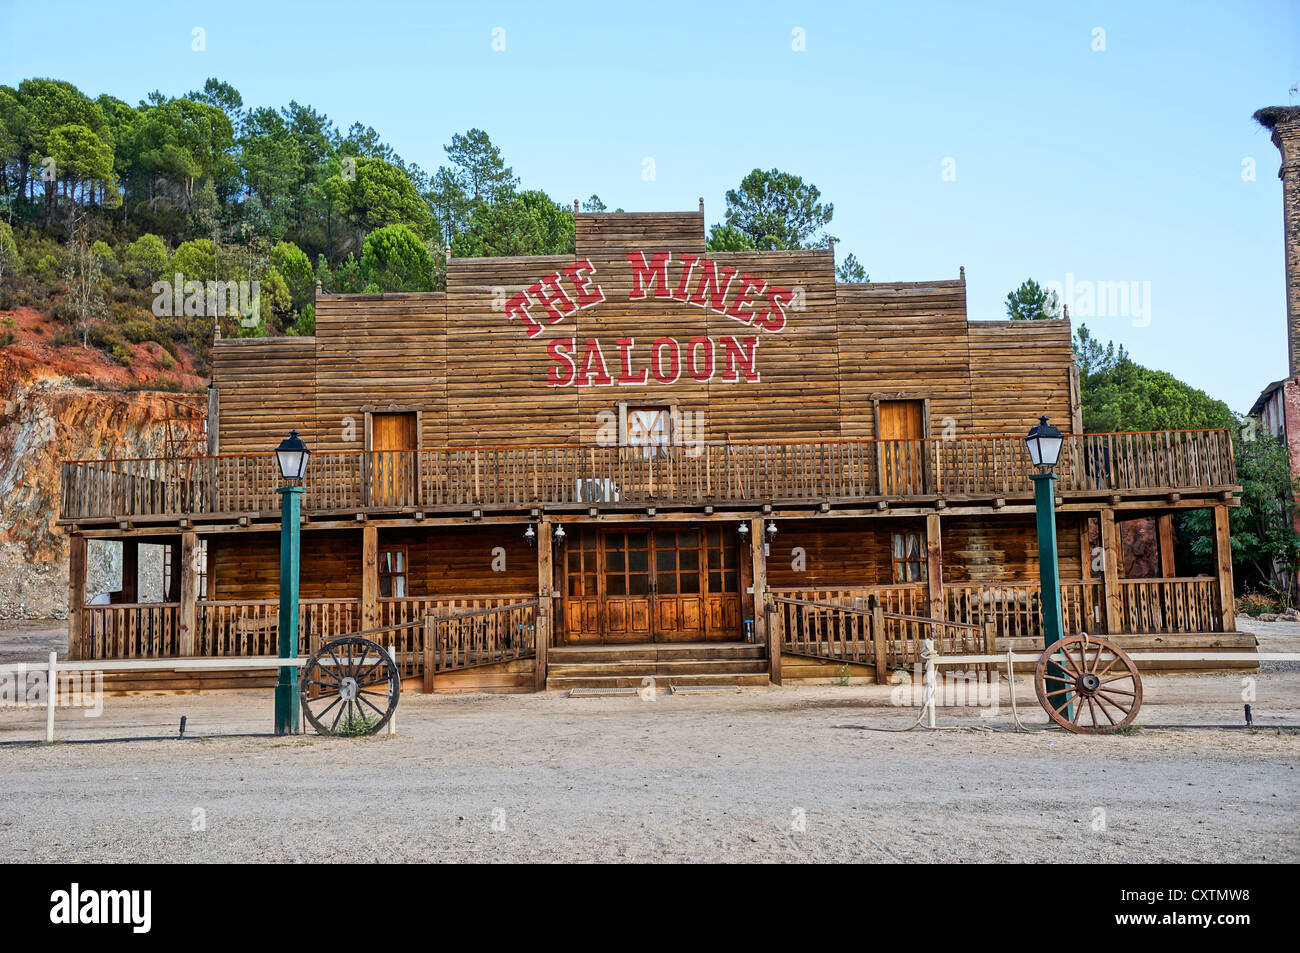 Western town saloon, a front view of an western antique wagon wheel from the days of the wild west Seville, Spain Stock Photo